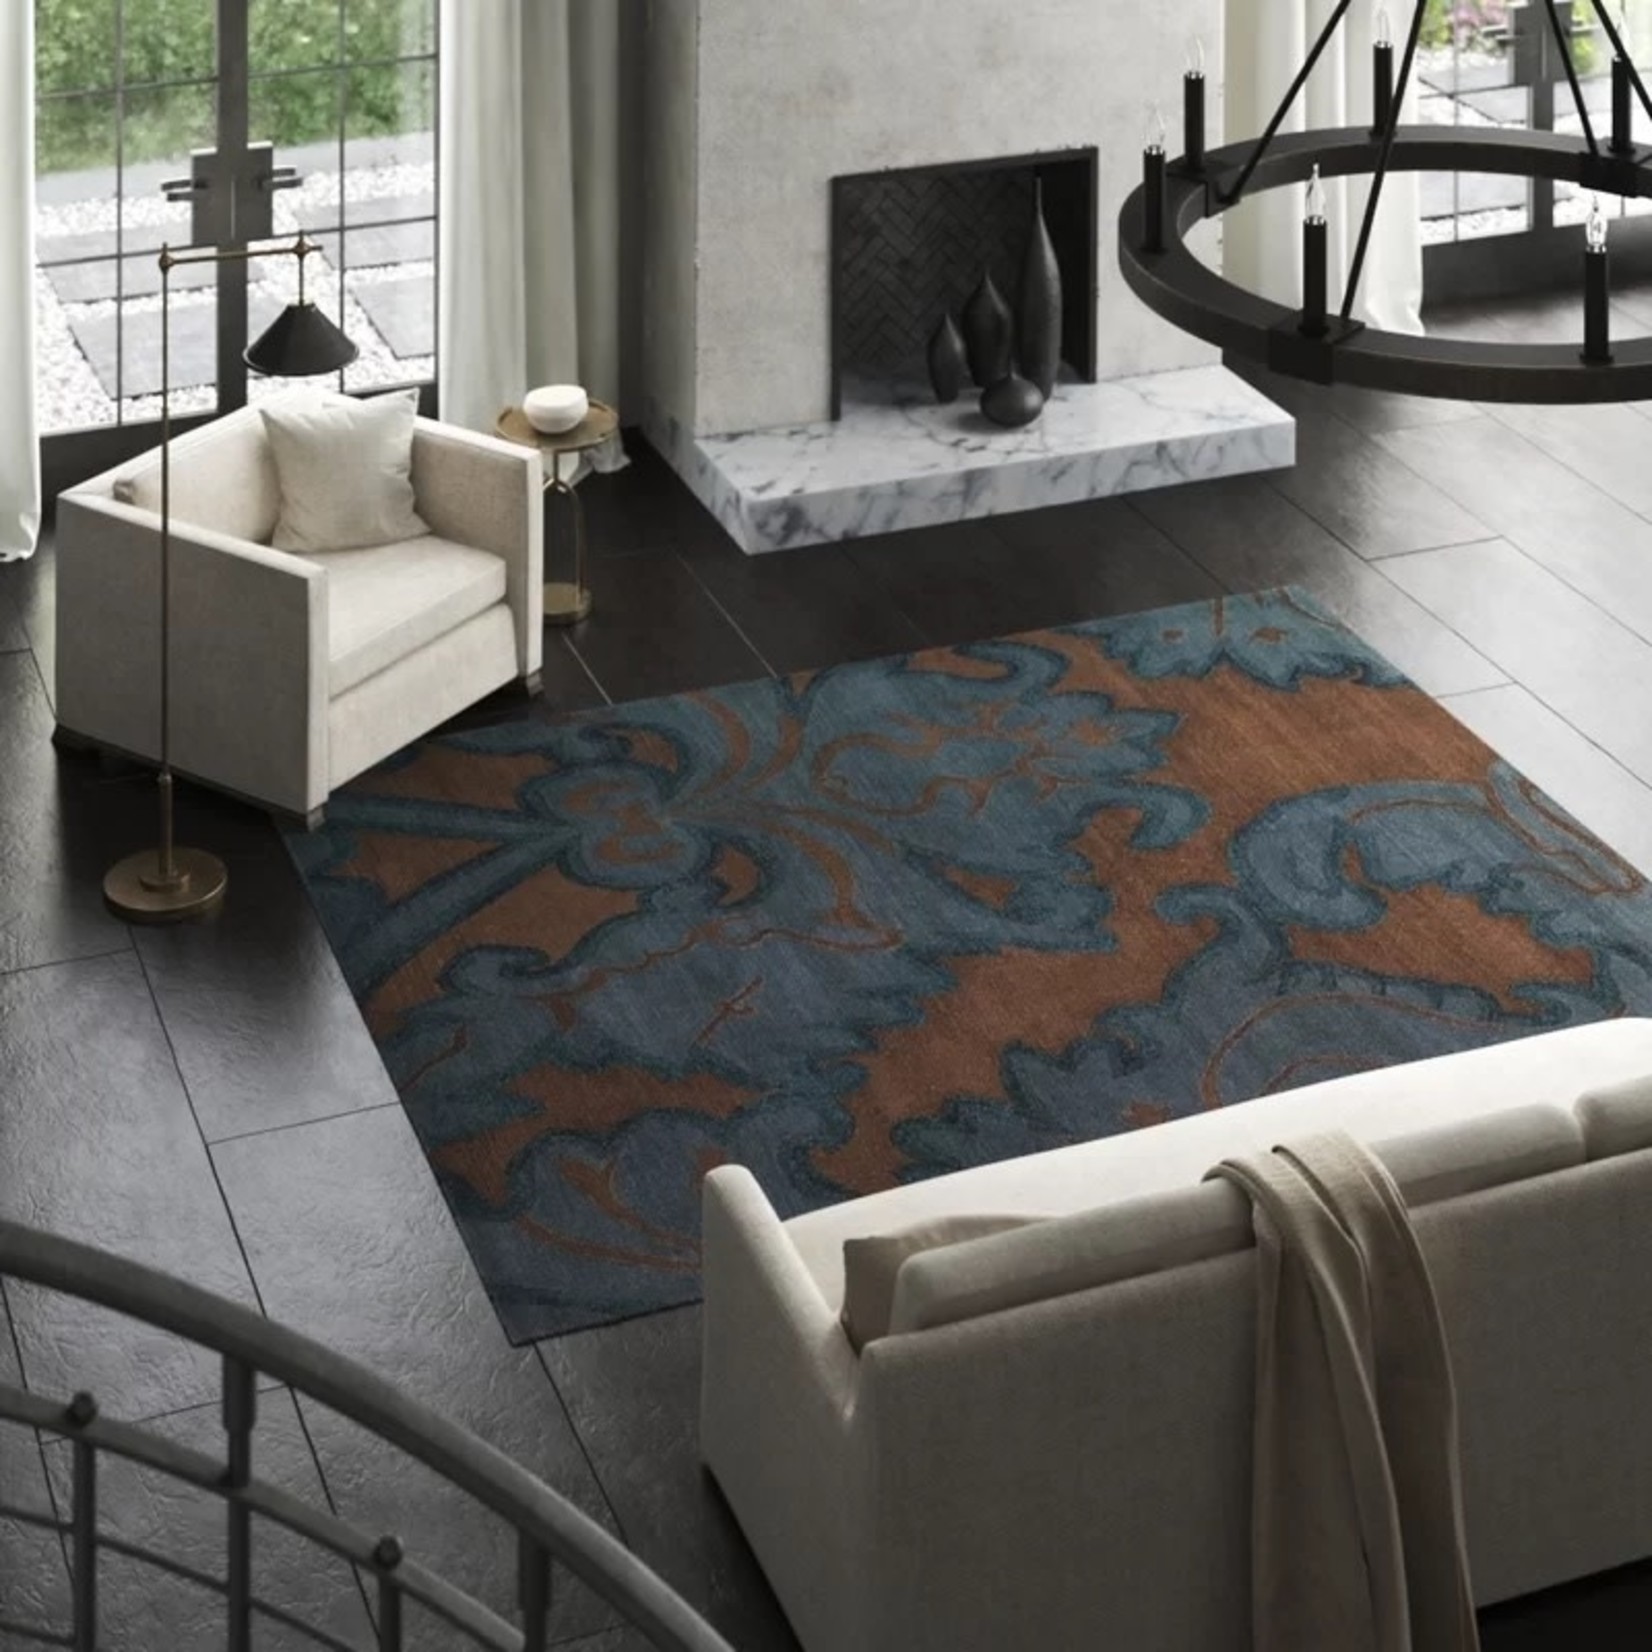 *5'6 x 8'6 Implied Damask Hand-Knotted Wool/Silk Blue/Brown Area Rug